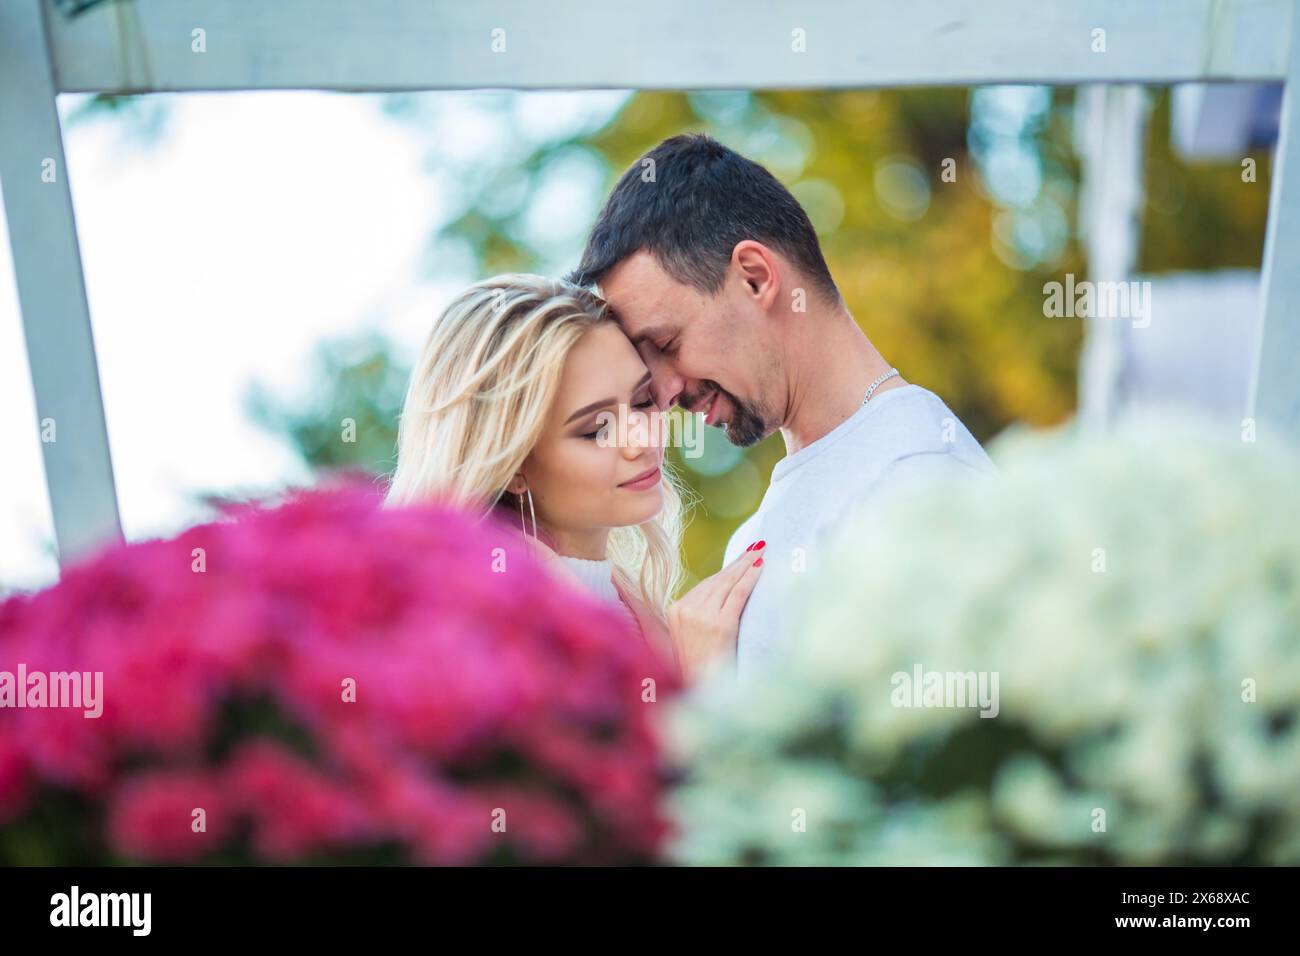 Love story engagement session of a happy young caucasian straight couple in white sweaters, boyfriend is hugging girlfriend, flowers foreground, blurr Stock Photo